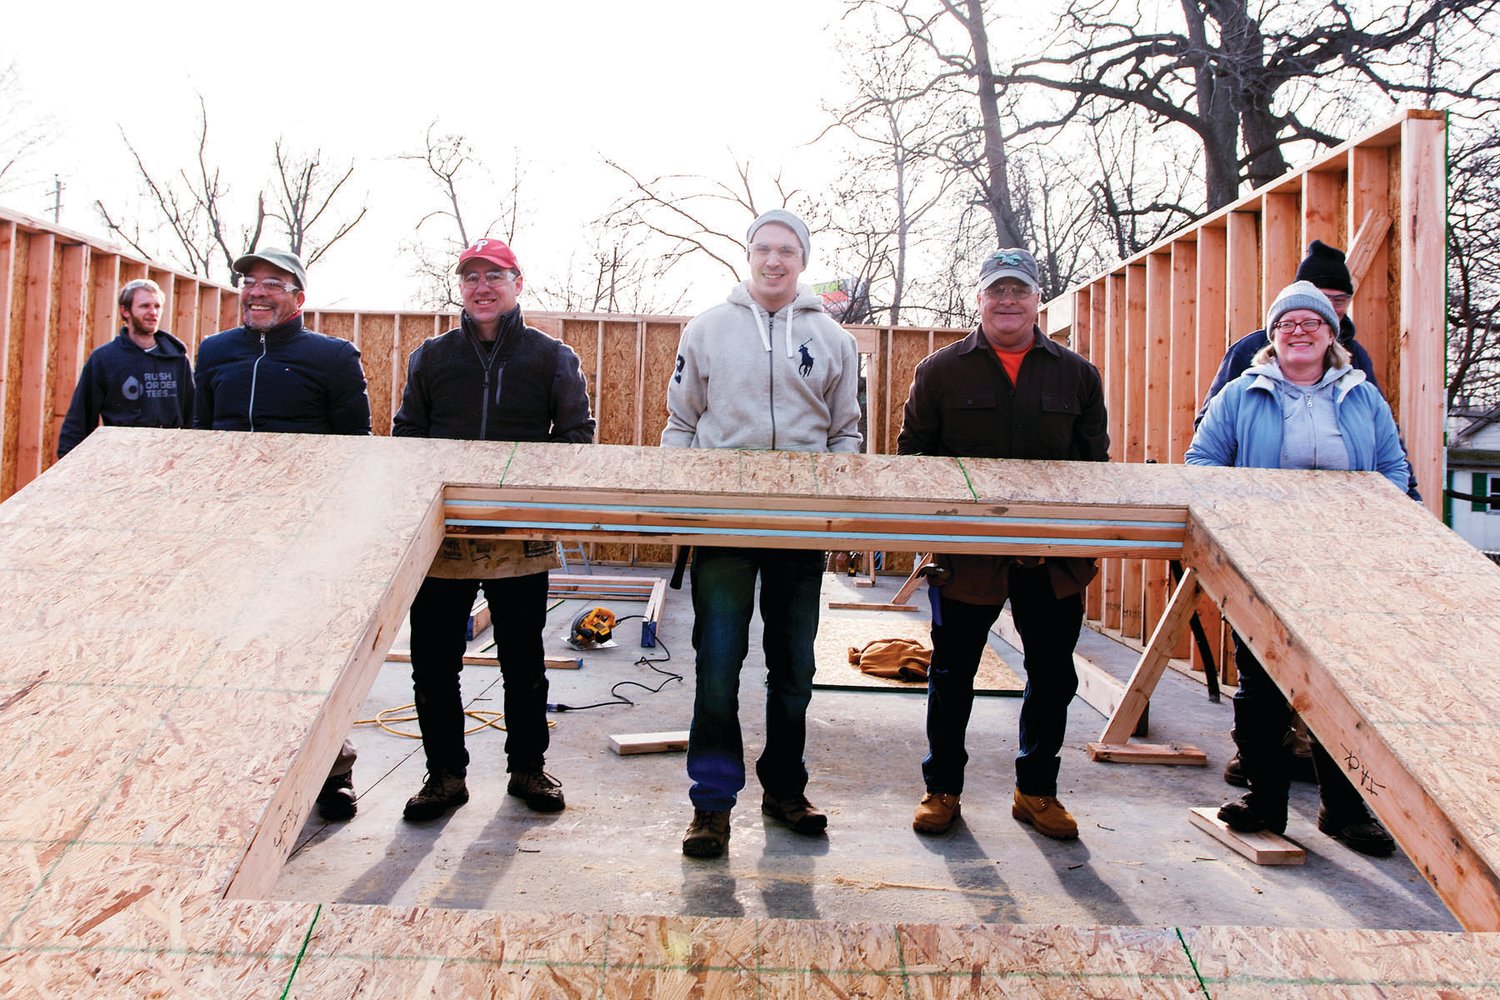 From left are Penn Community Bank directors and team members W. Thomas Lomax, Robert L. Byers, Will Kadri, Bruce Weed and Diane Brown during a build day for the Habitat for Humanity of Bucks County Woodland Park Project in Morrisville on Jan. 4.